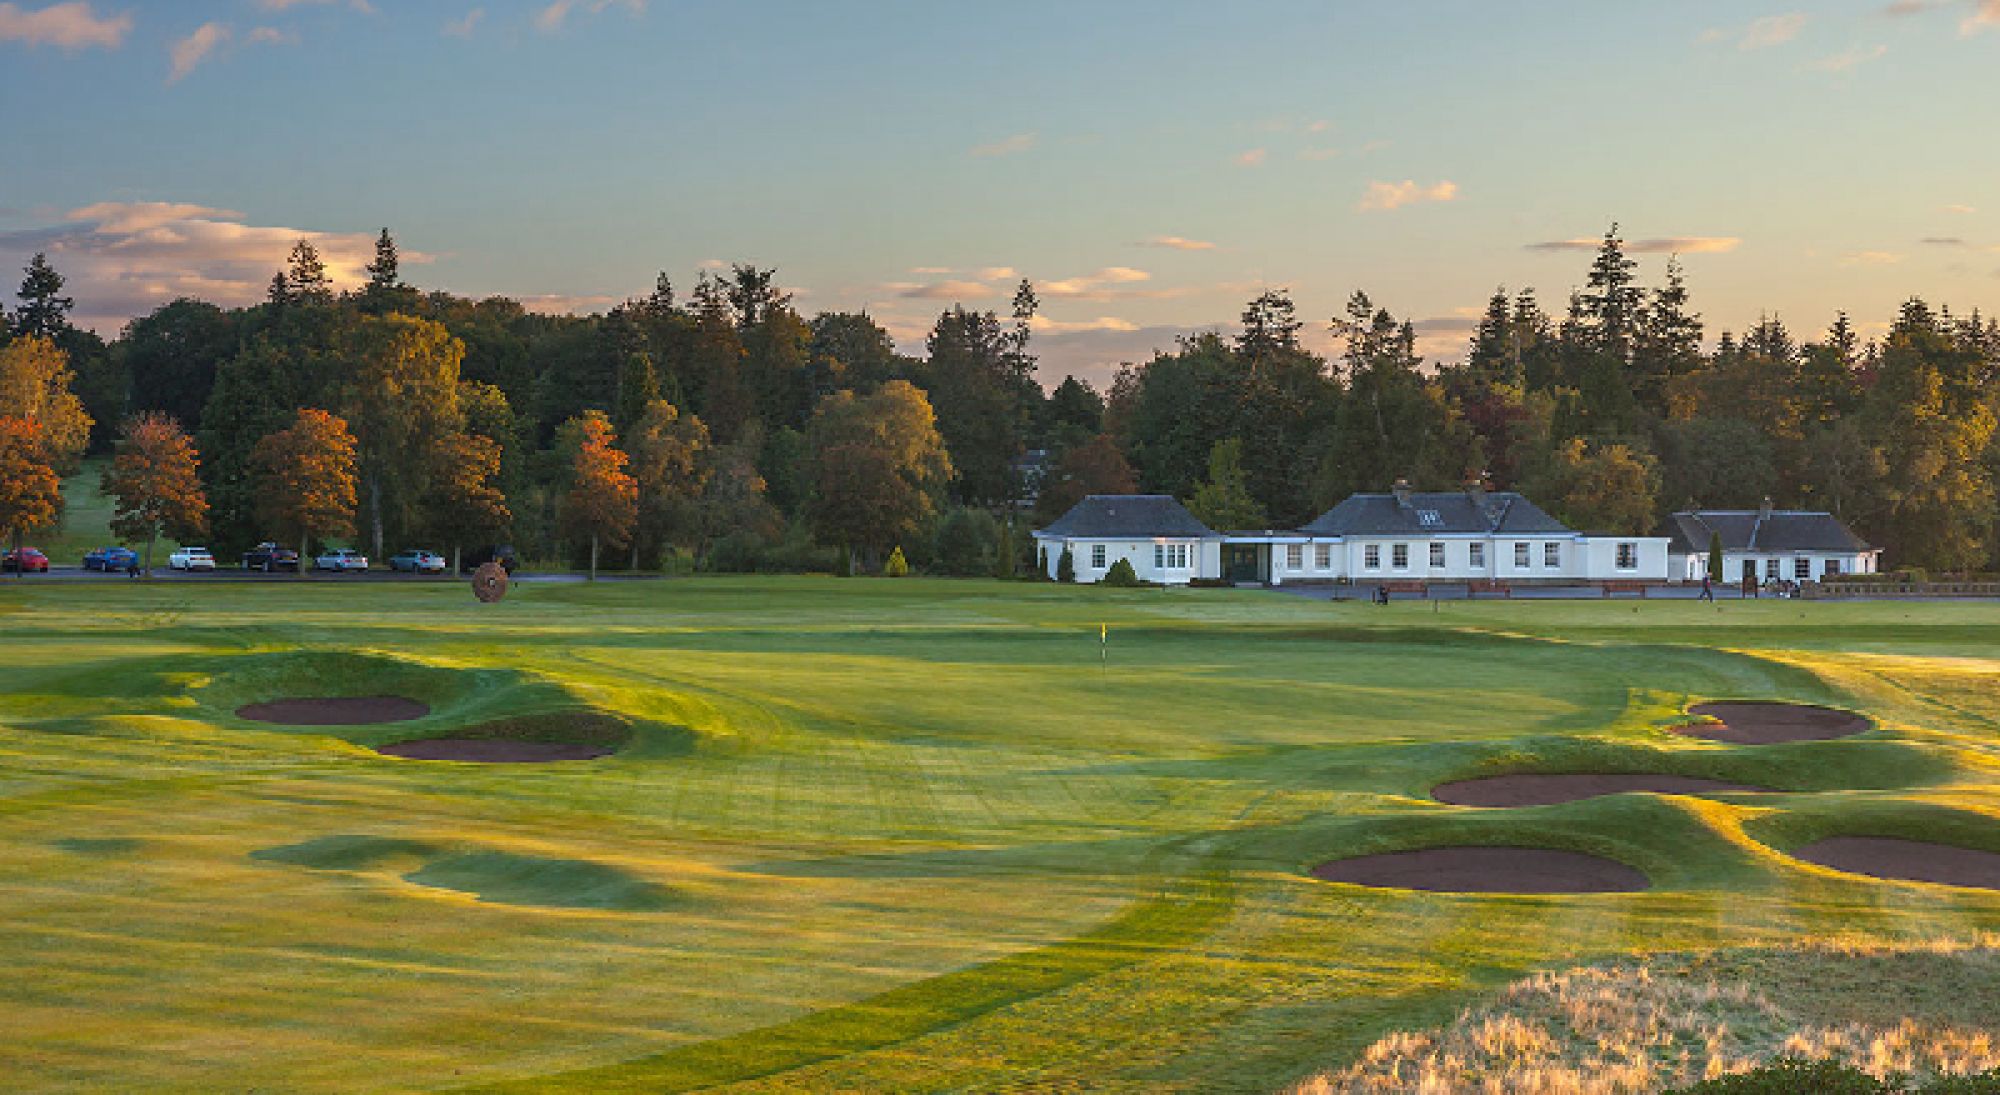 The Kings Course - Gleneagles features lots of the most excellent golf course around Scotland